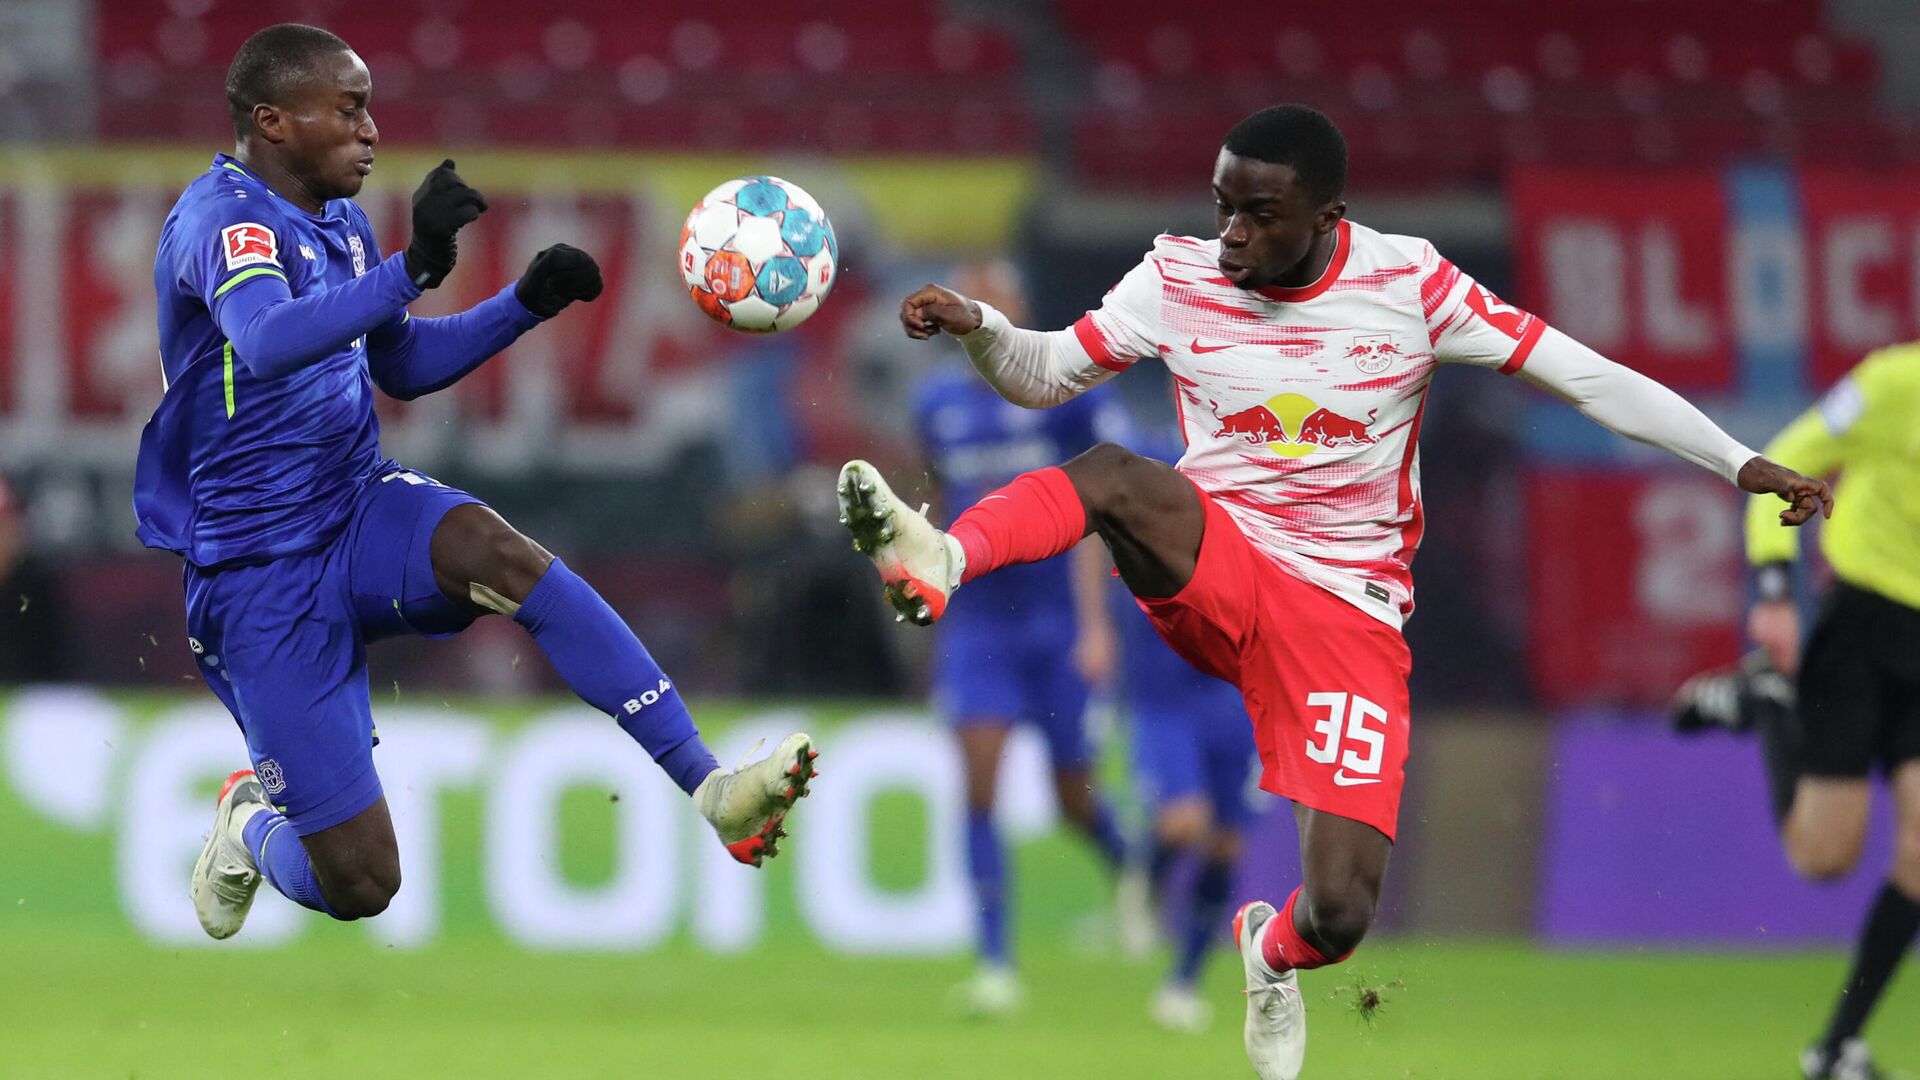 Leverkusen's French forward Moussa Diaby (L) and RB Leipzig's Dutch-Ghanaian defender Solomon Bonnah vie for the ball during the German first division Bundesliga football match between RB Leipzig and Bayer 04 Leverkusen in Leipzig, eastern Germany, on November 28, 2021. (Photo by Ronny HARTMANN / AFP) / DFL REGULATIONS PROHIBIT ANY USE OF PHOTOGRAPHS AS IMAGE SEQUENCES AND/OR QUASI-VIDEO - РИА Новости, 1920, 28.11.2021